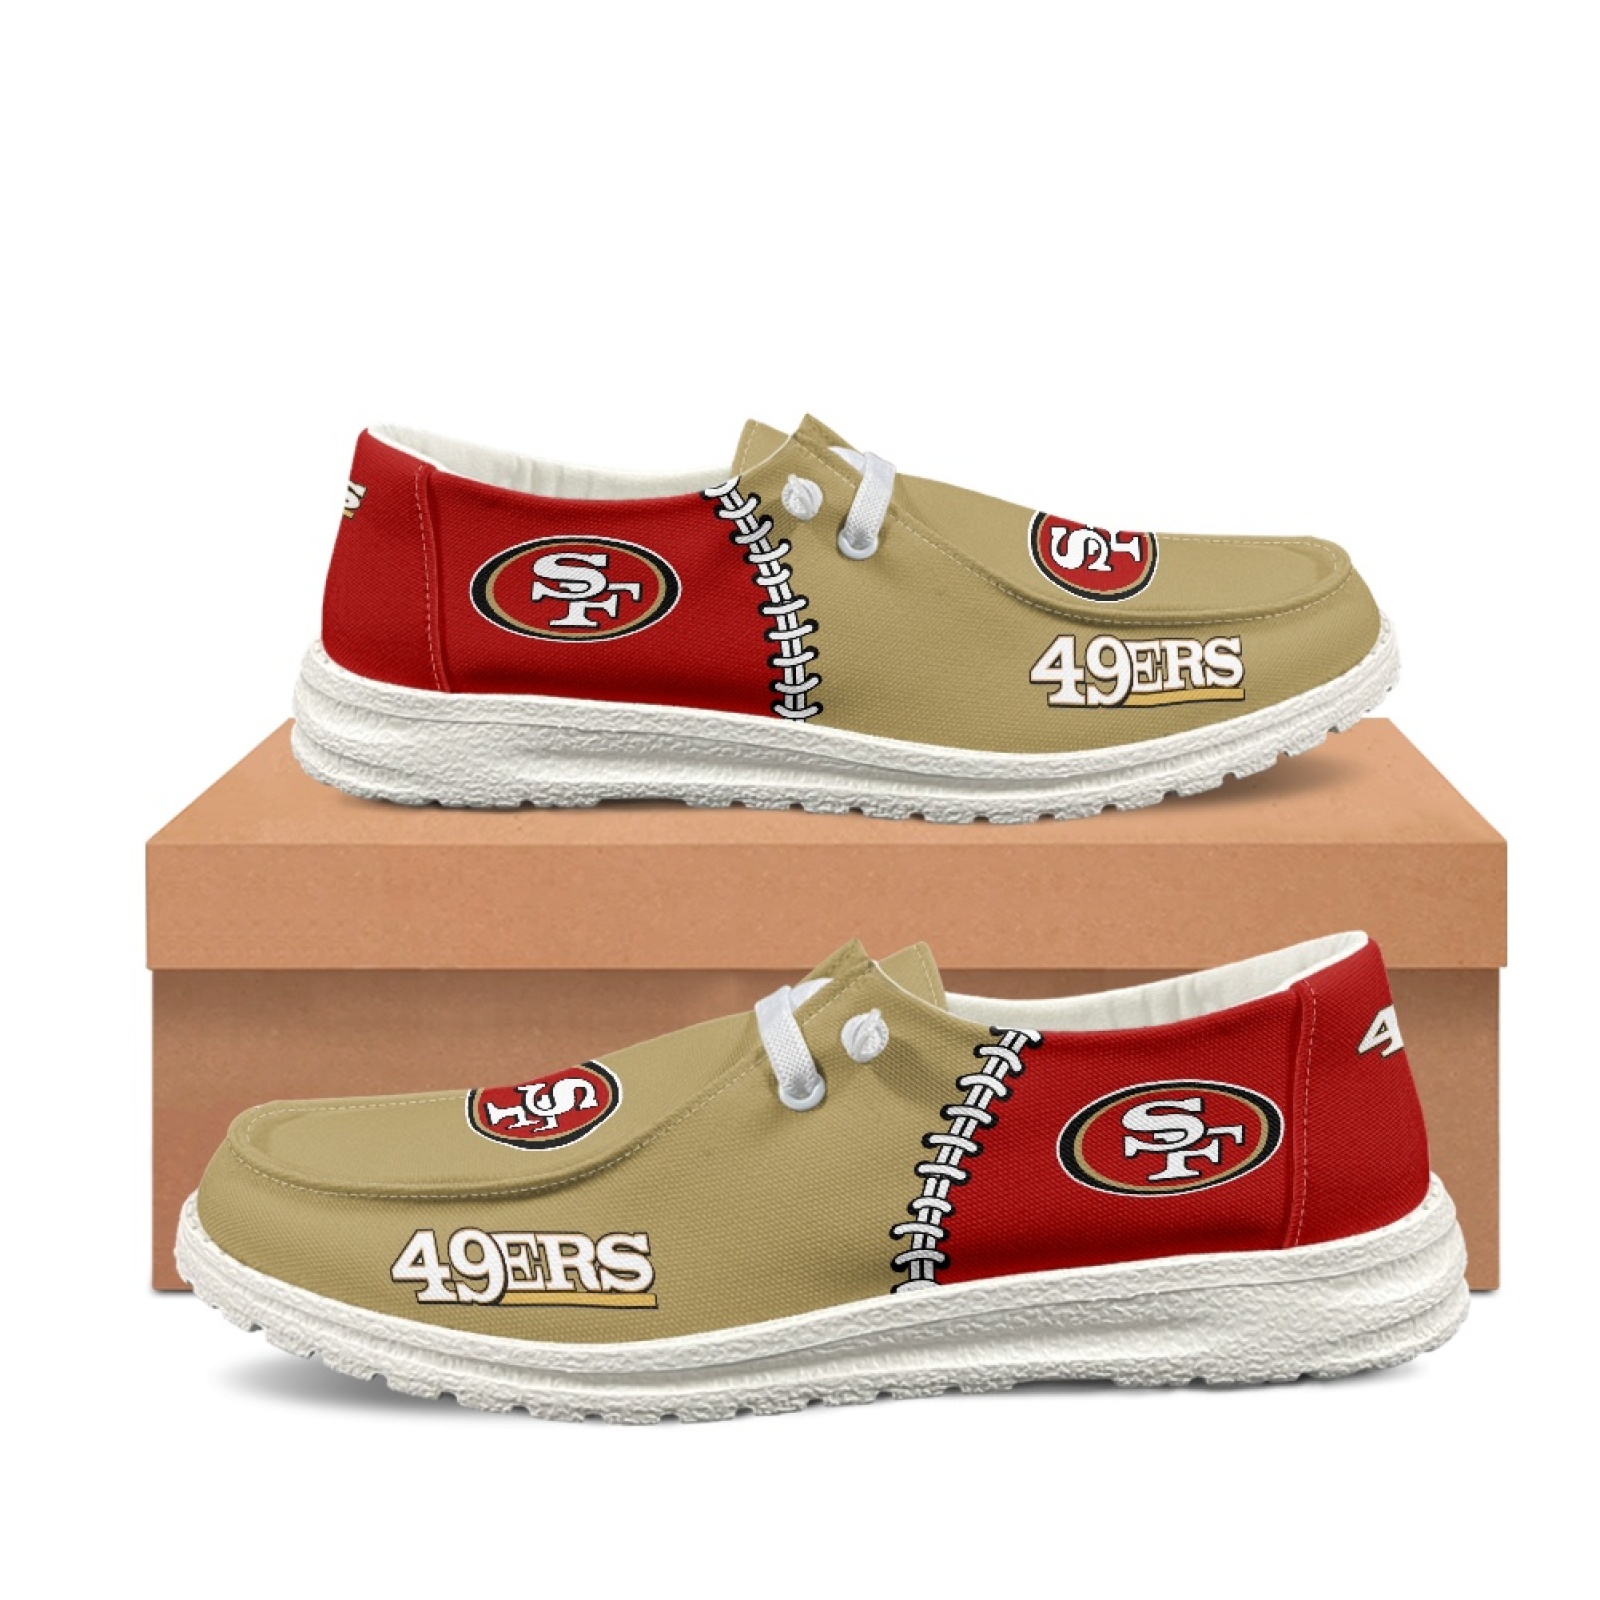 San Francisco 49ers Tribute Edition Hey Dude Shoes